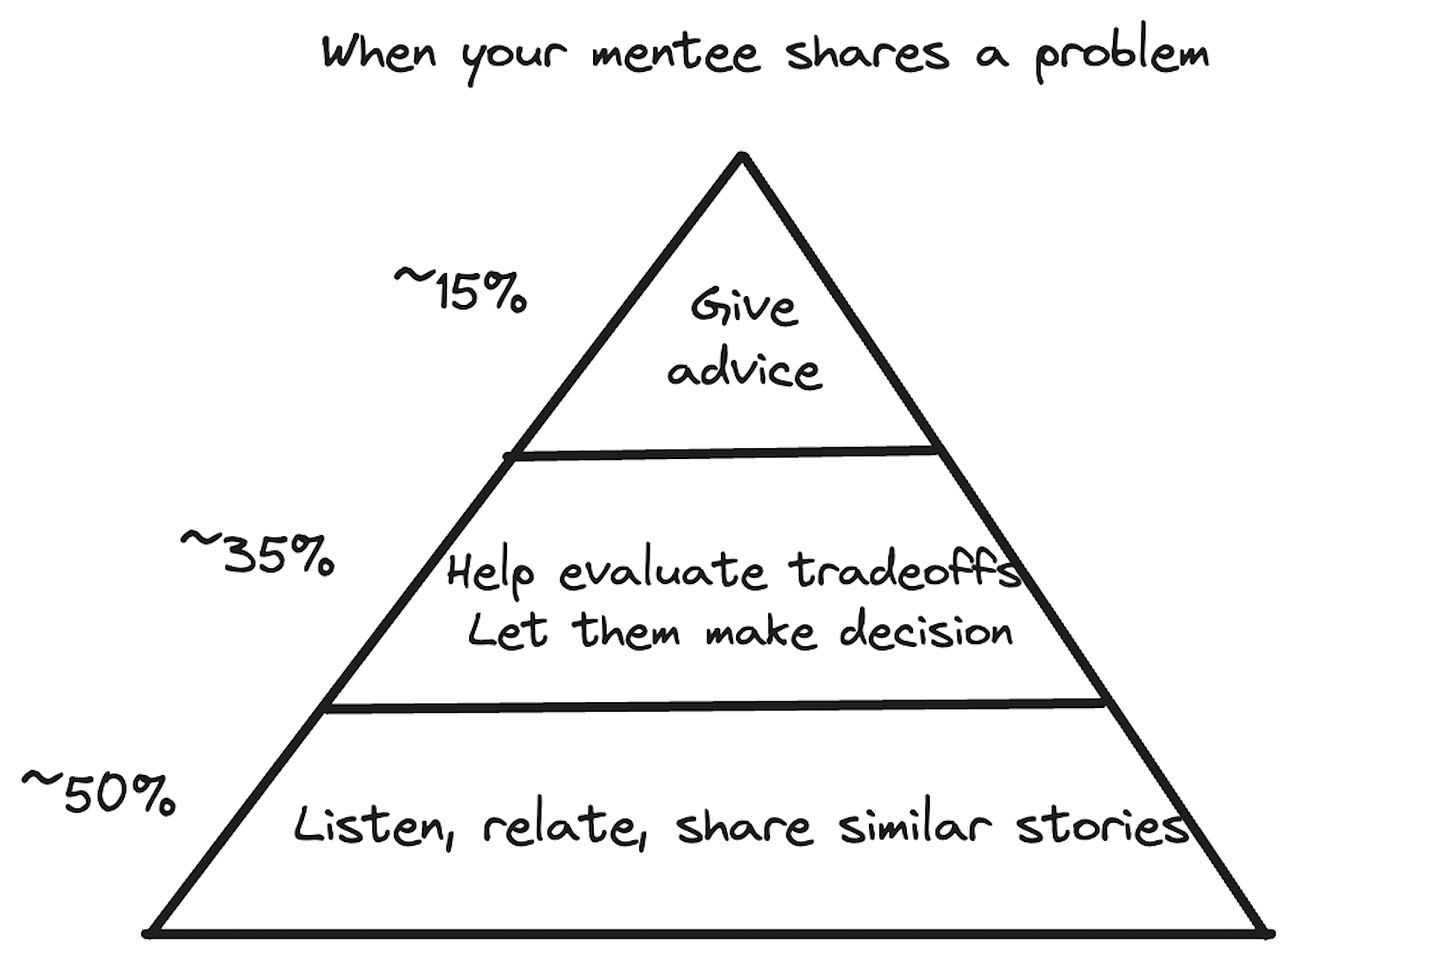 When your mentee shares a problem, ~50% of the time you should "Listen, relate, share similar stories." About ~35% of the time you should "Help evaluate tradeoffs and let them make a decision." About ~15% of the time you should give direct advice.